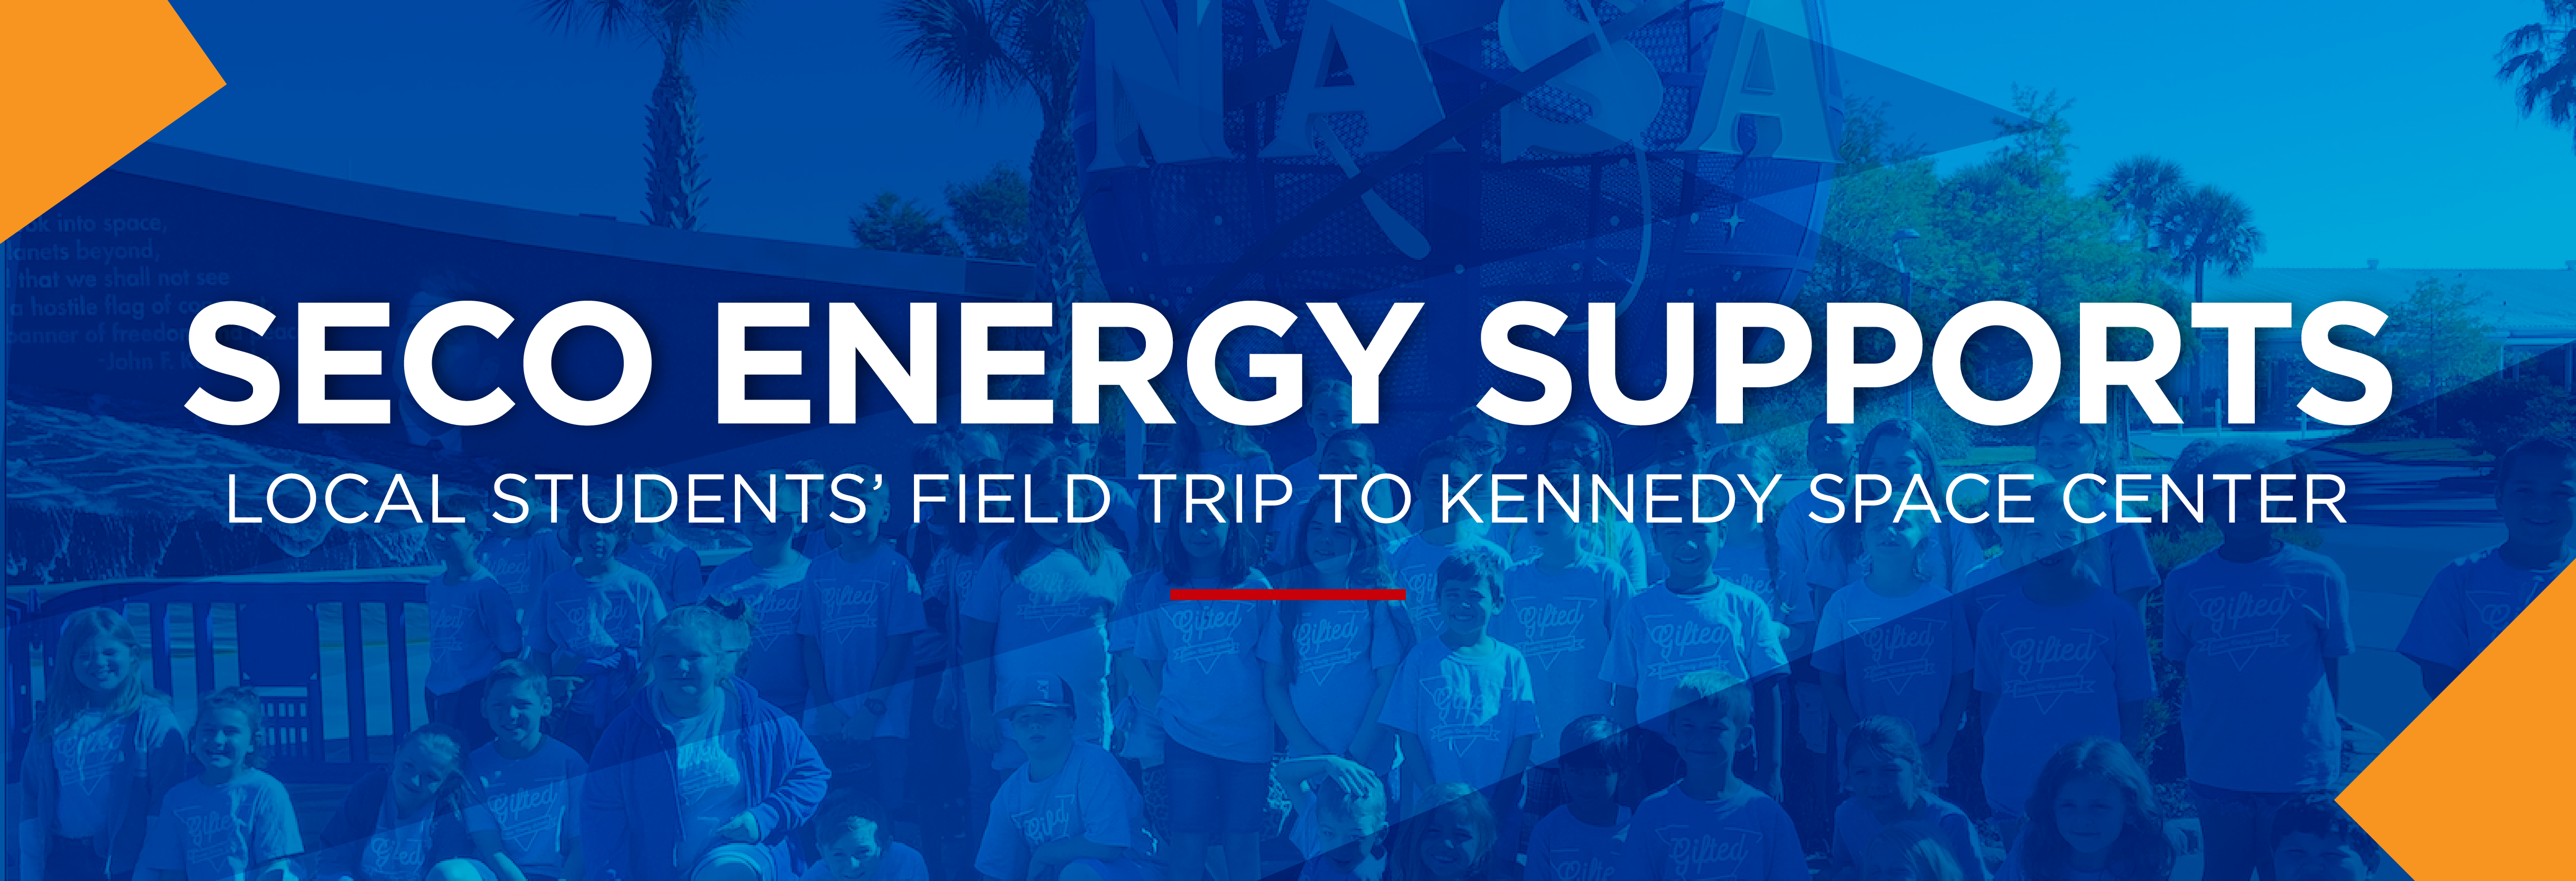 SECO Energy Supports Local Students’ Field Trip to Kennedy Space Center